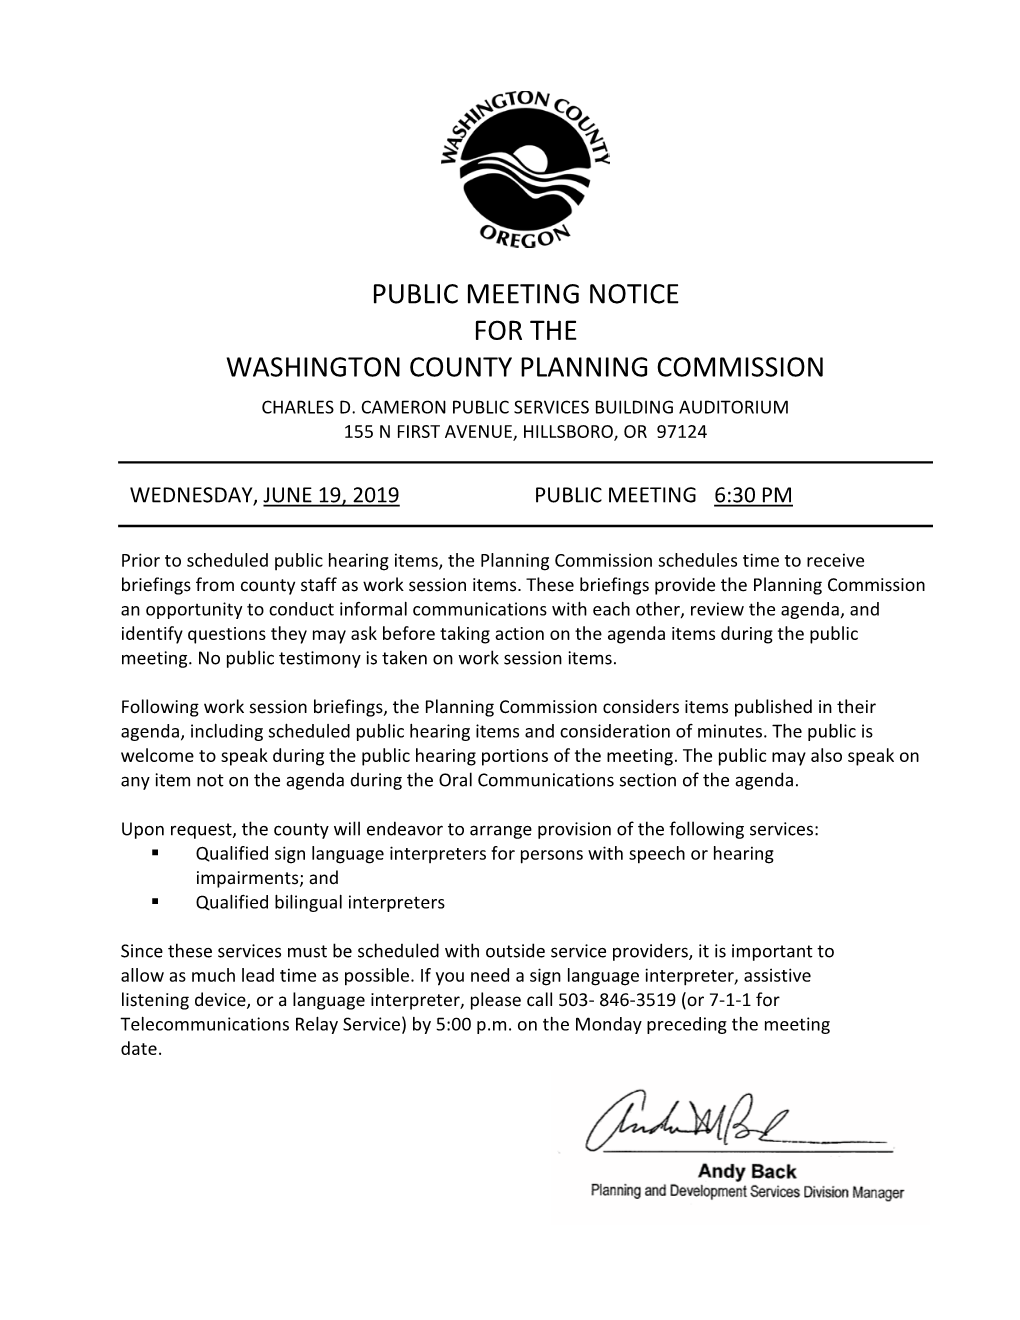 Public Meeting Notice for the Washington County Planning Commission Charles D